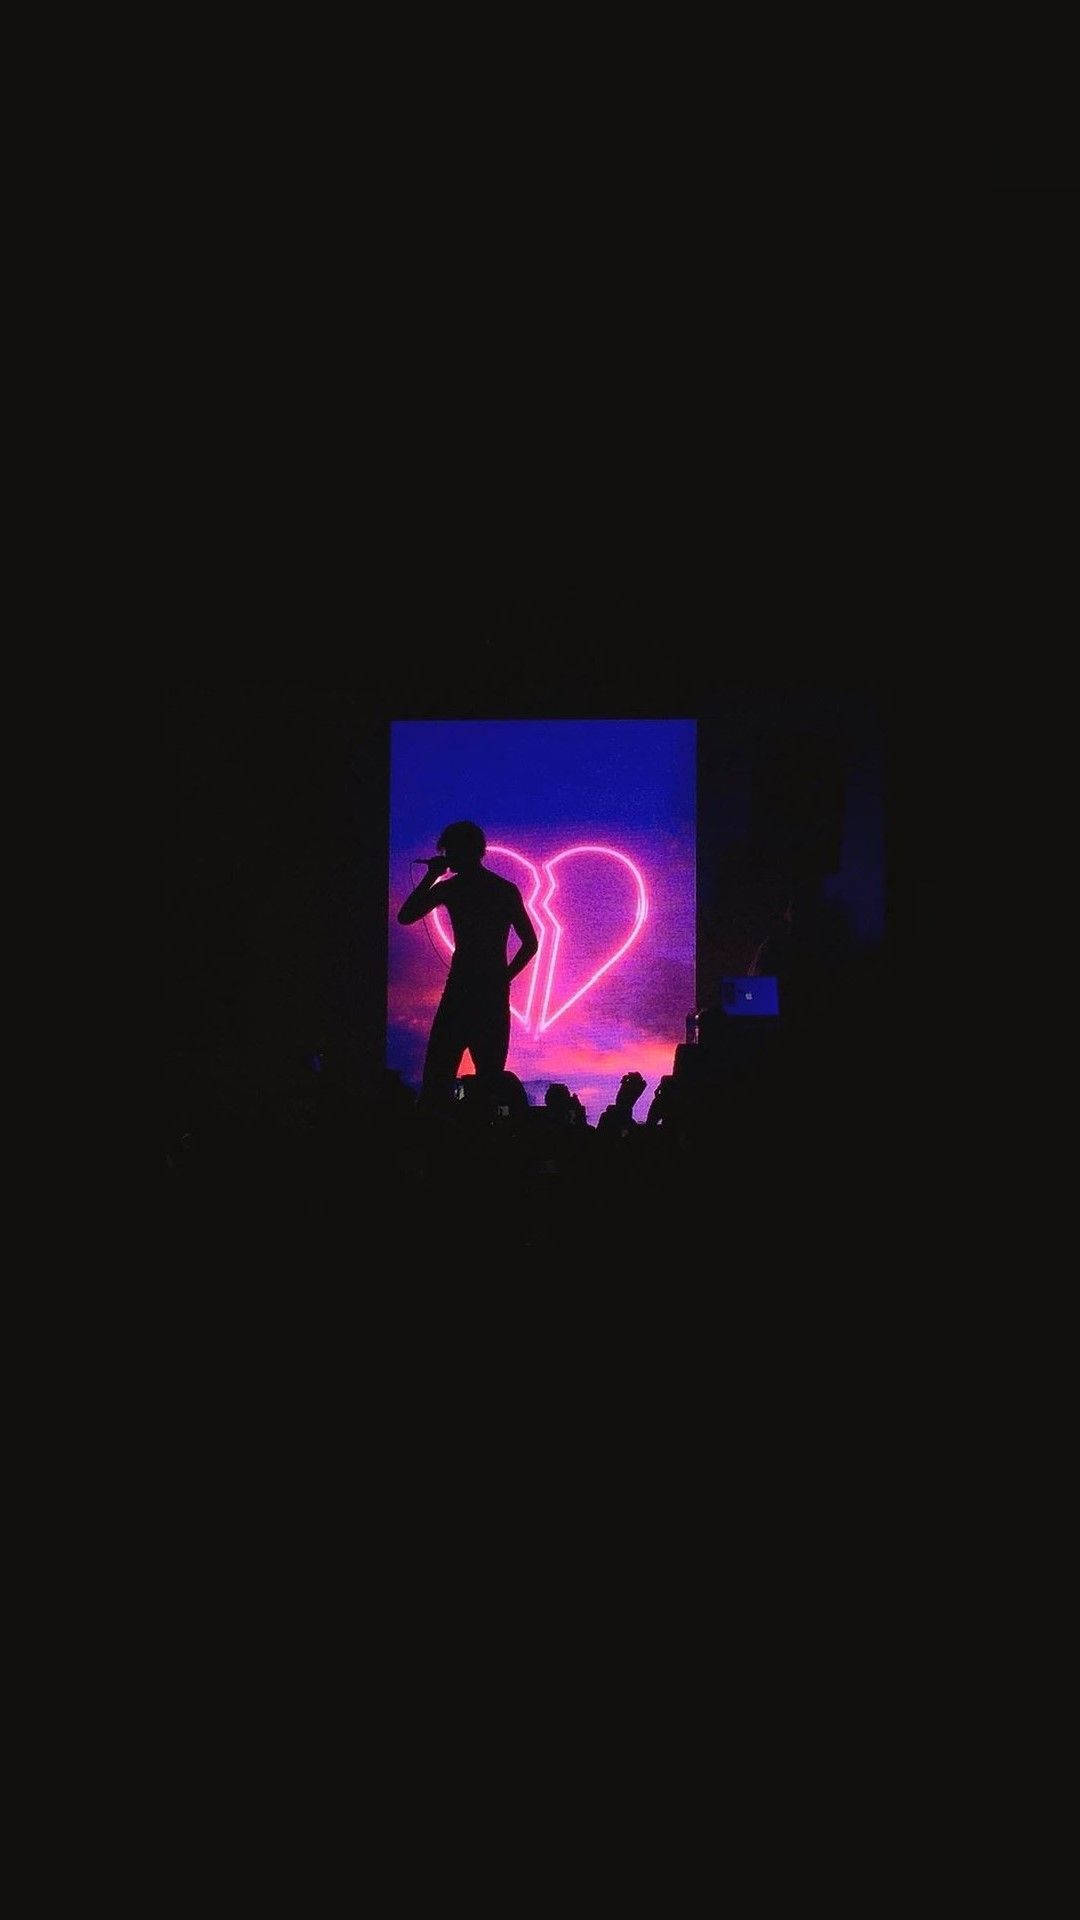 Lil Peep Silhouette Concert Background